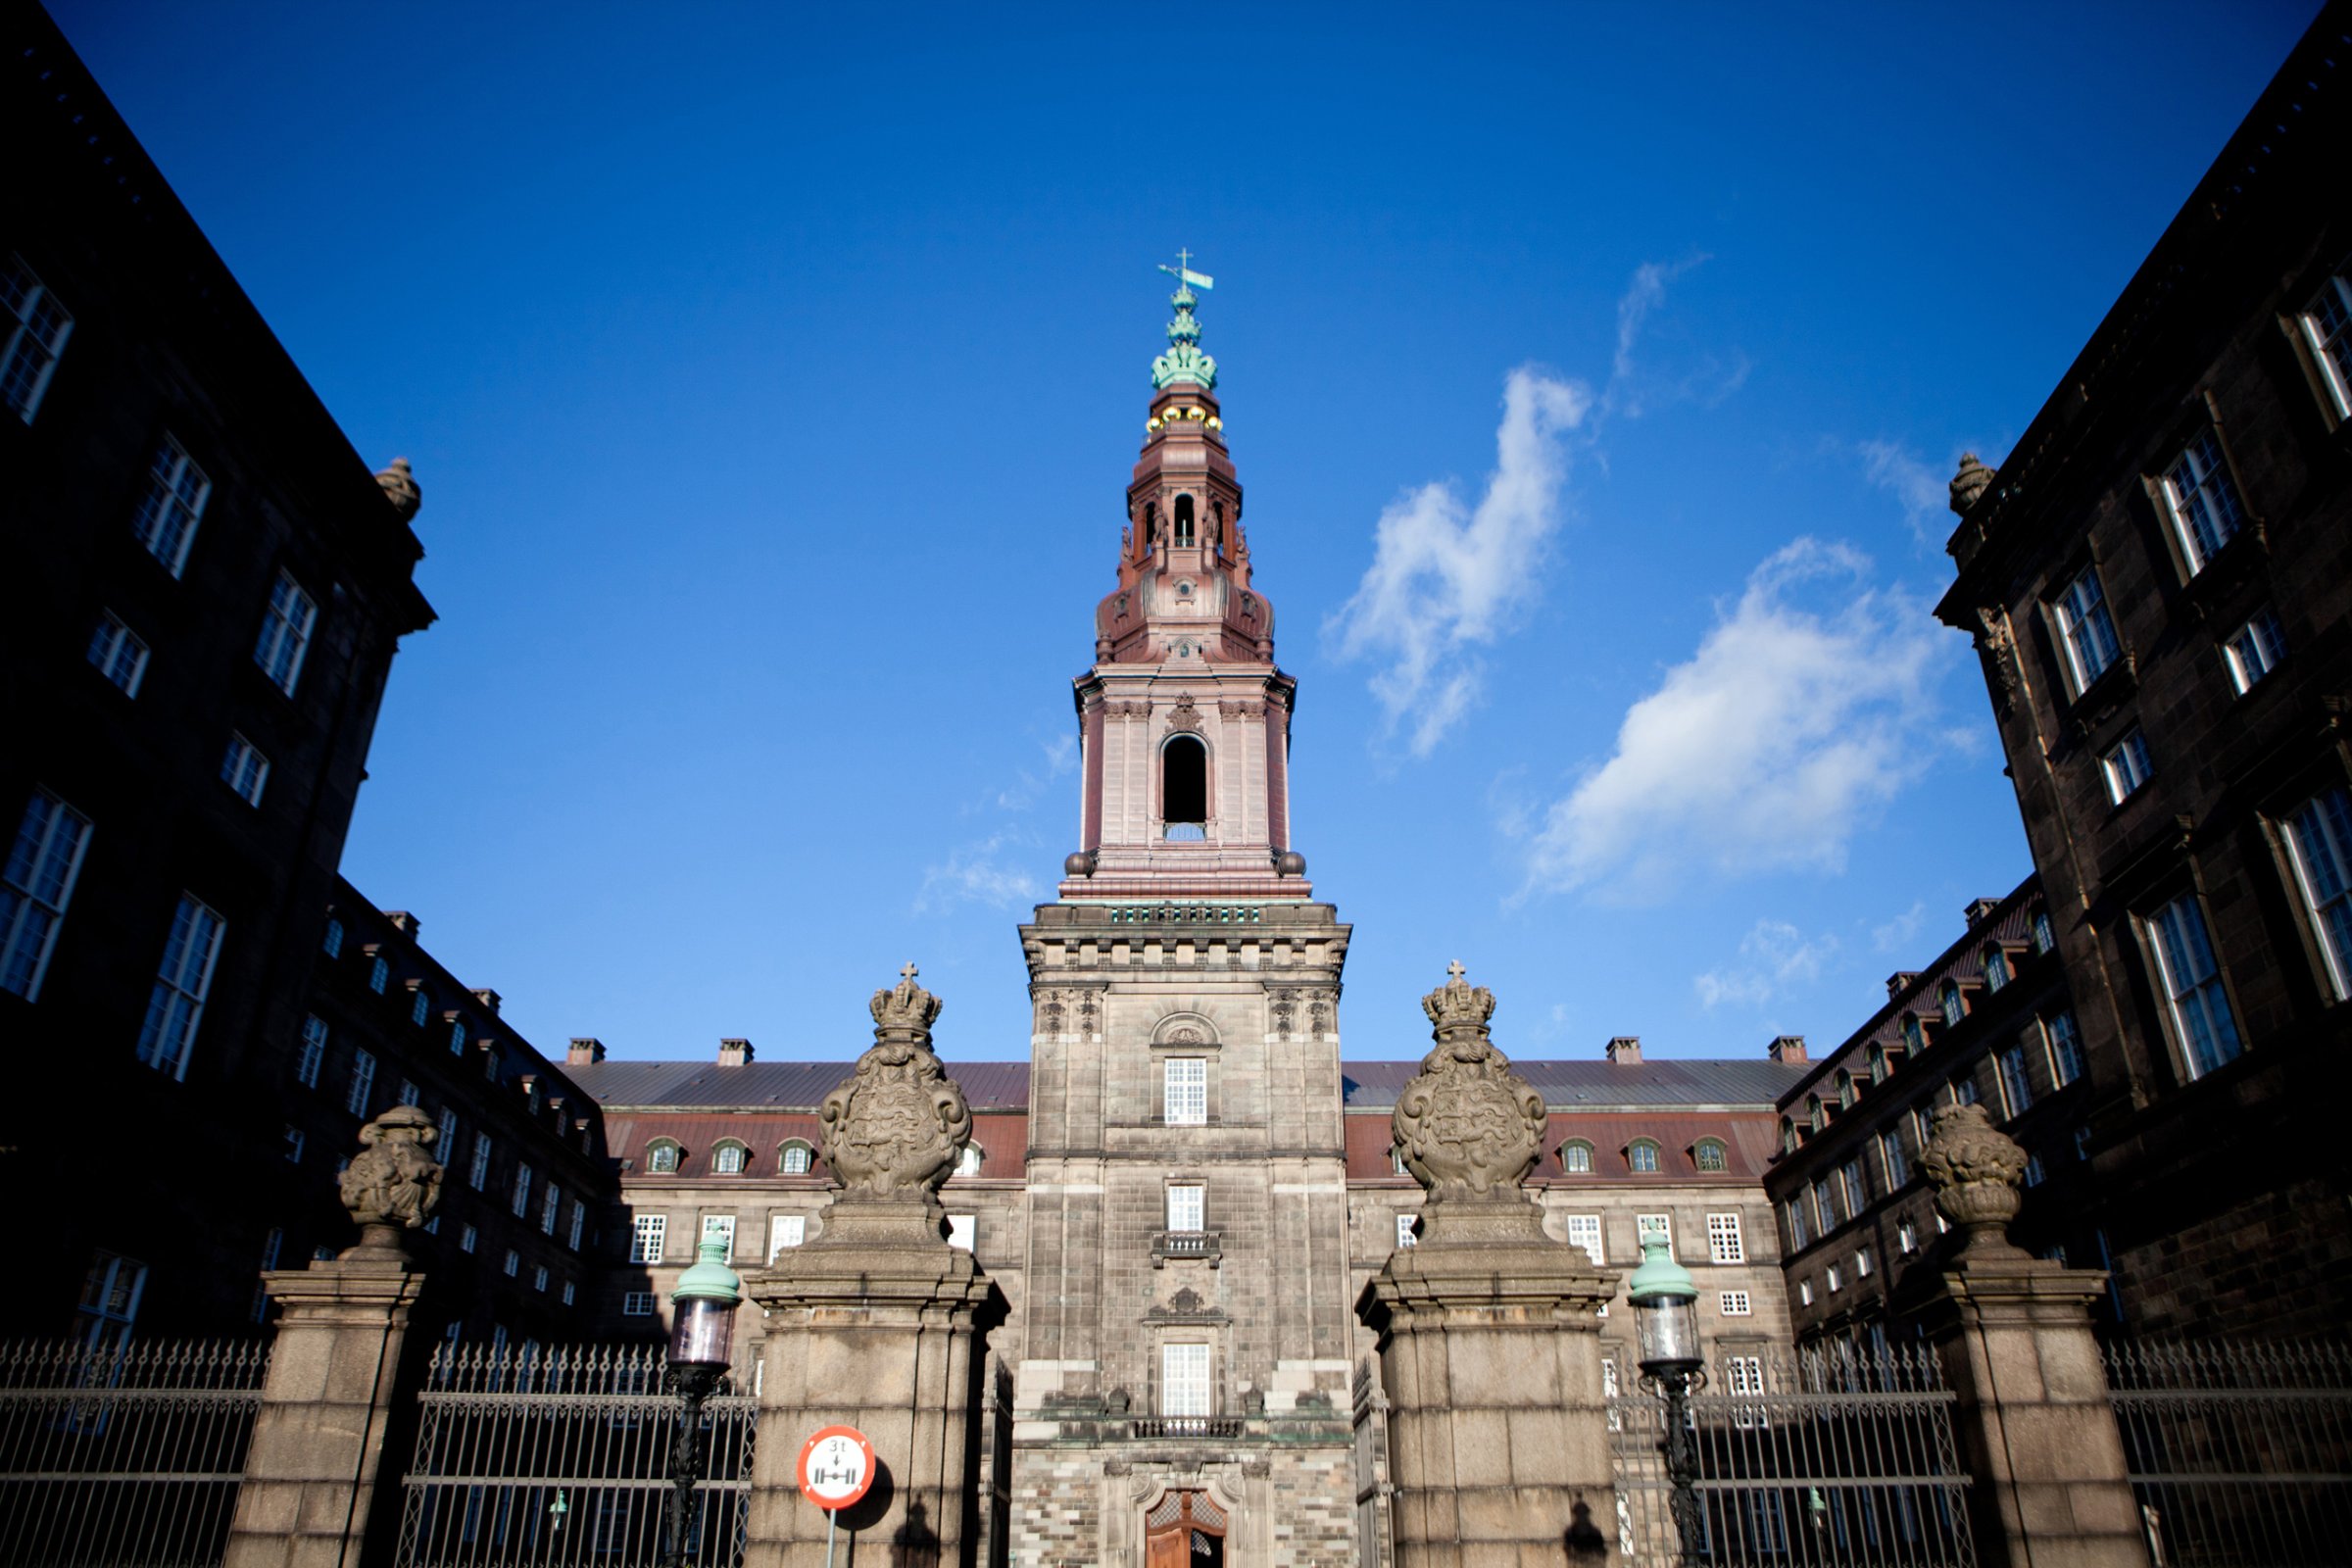 Denmark's parliament building, the Christiansborg Palace, stands in Copenhagen, Denmark, on Tuesday, March 13, 2012.